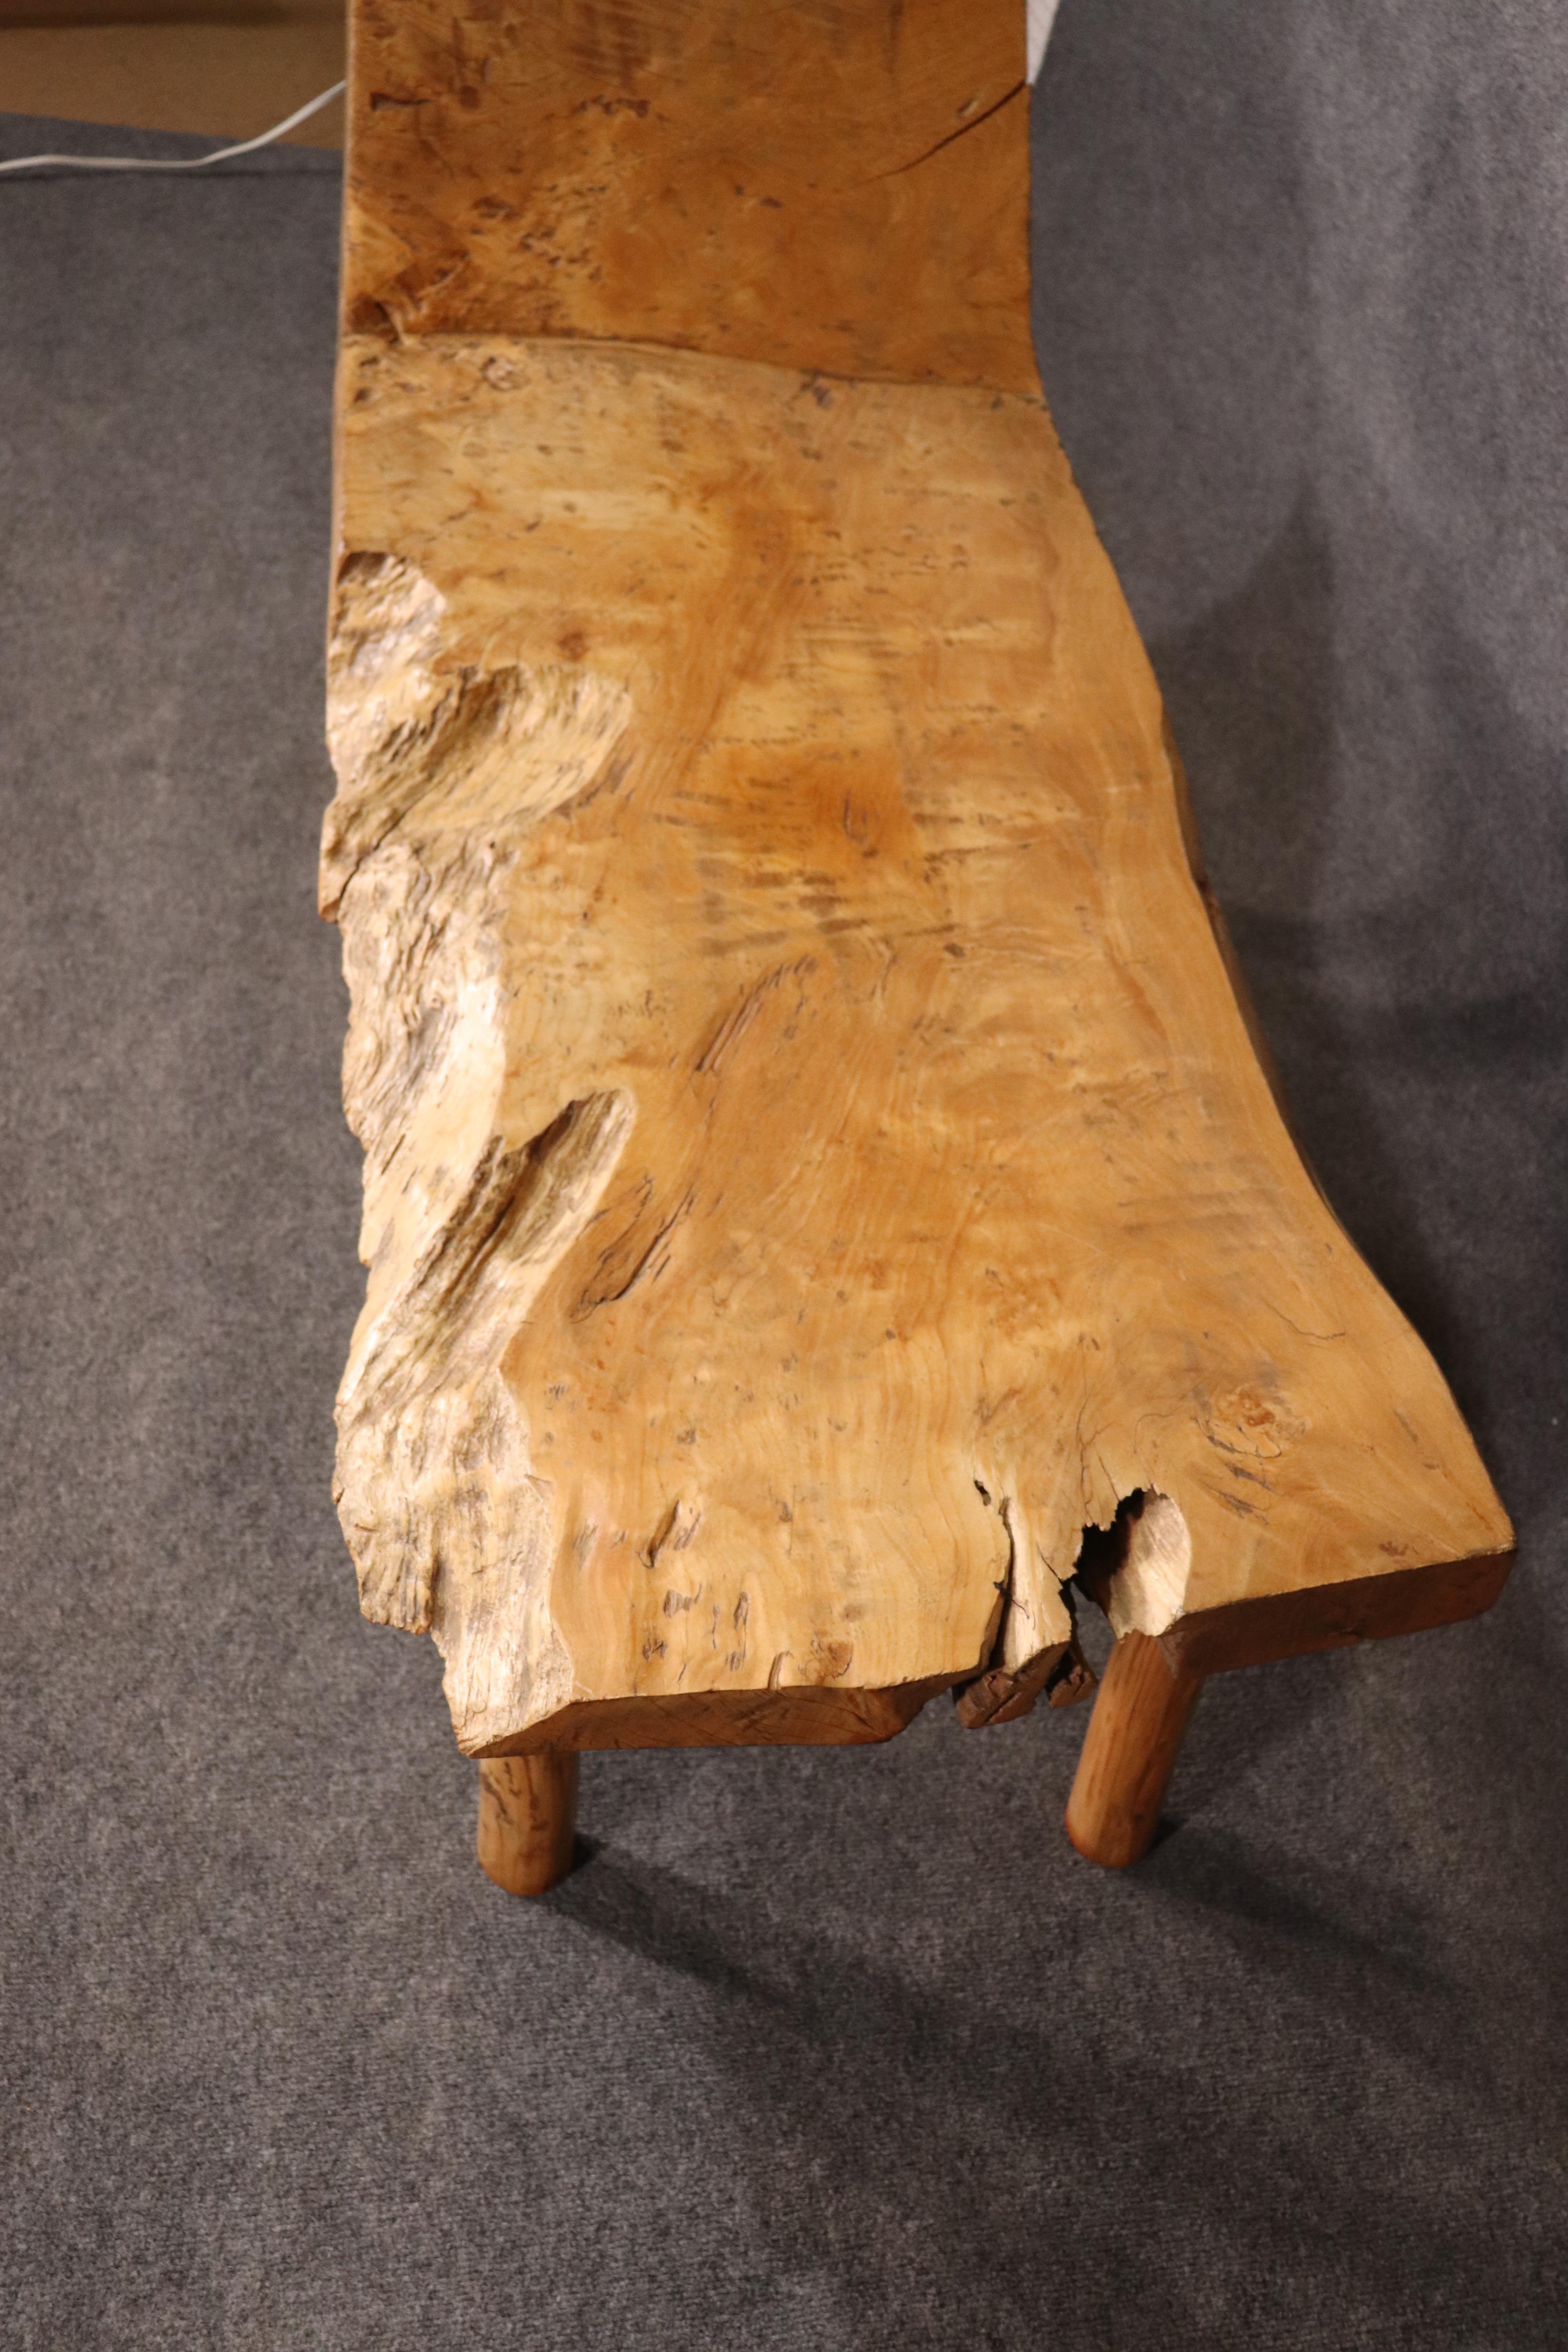 This is a beautiful vintage studio-made live edge chaise. This is not a new item made because of the current fascination with this style. This is an older piece dating to circa 1970 or so.
Measures: 22 wide x 63.5 long x 32 tall seat height is 18.5.